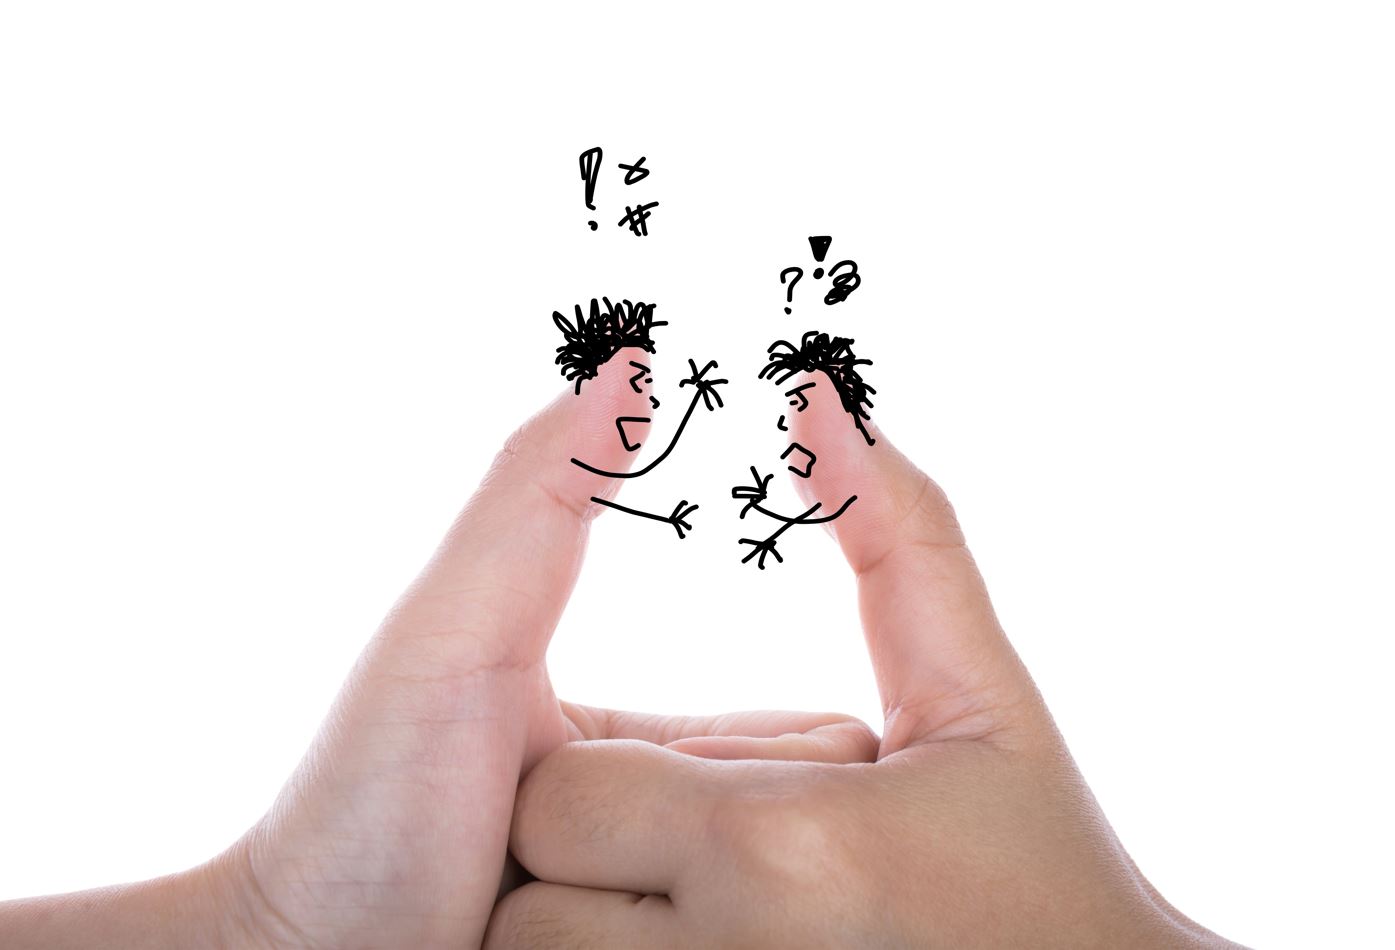 The Best Way to Resolve Conflict | St Andrews - The best way to resolve conflict with peers